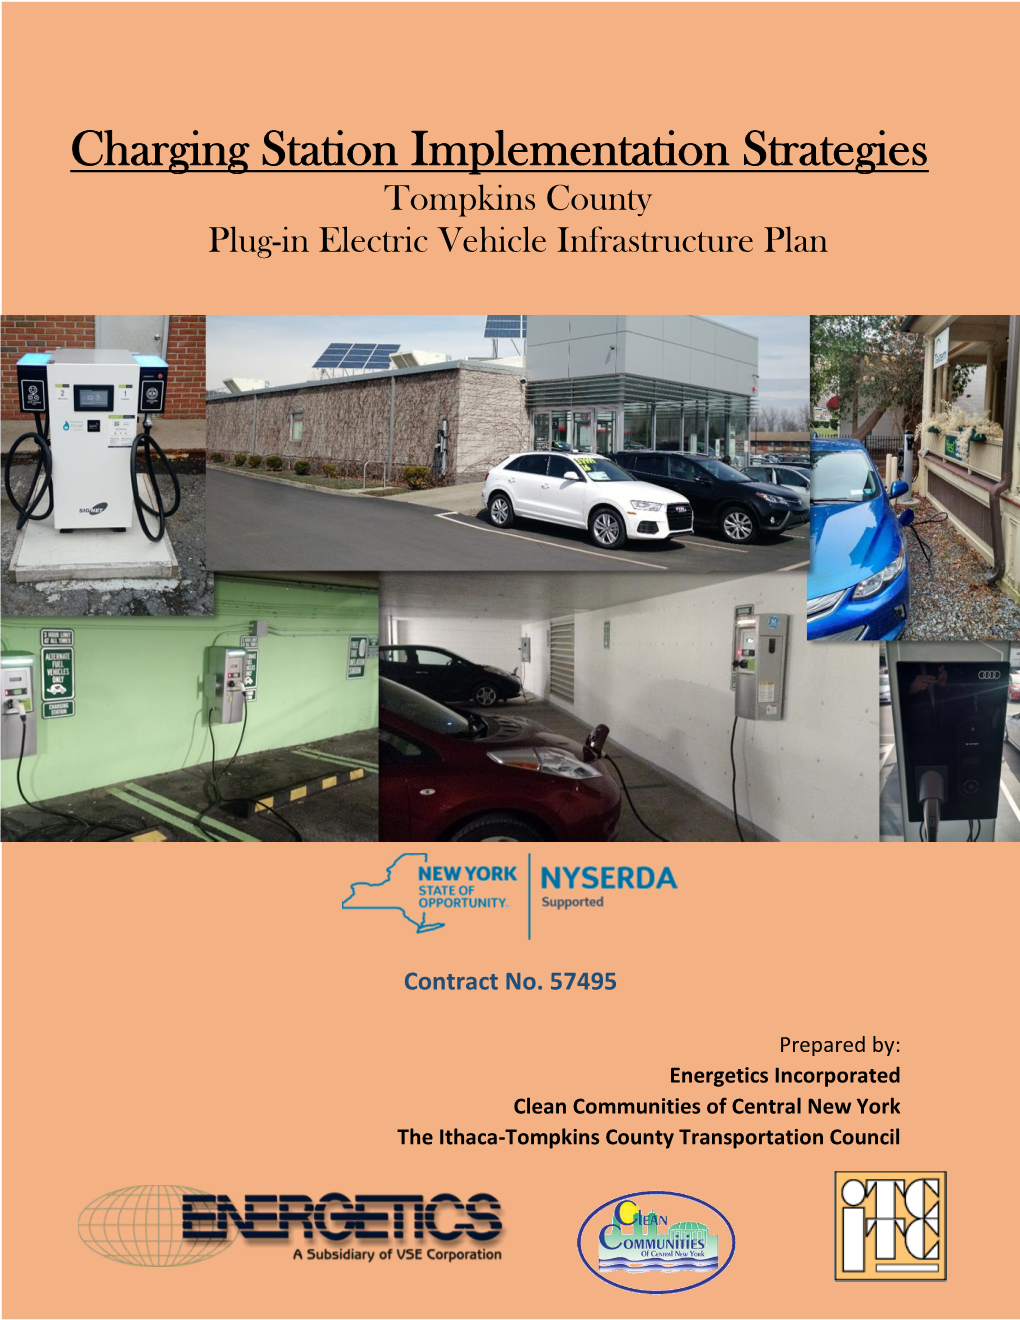 Charging Station Implementation Strategies Tompkins County Plug-In Electric Vehicle Infrastructure Plan